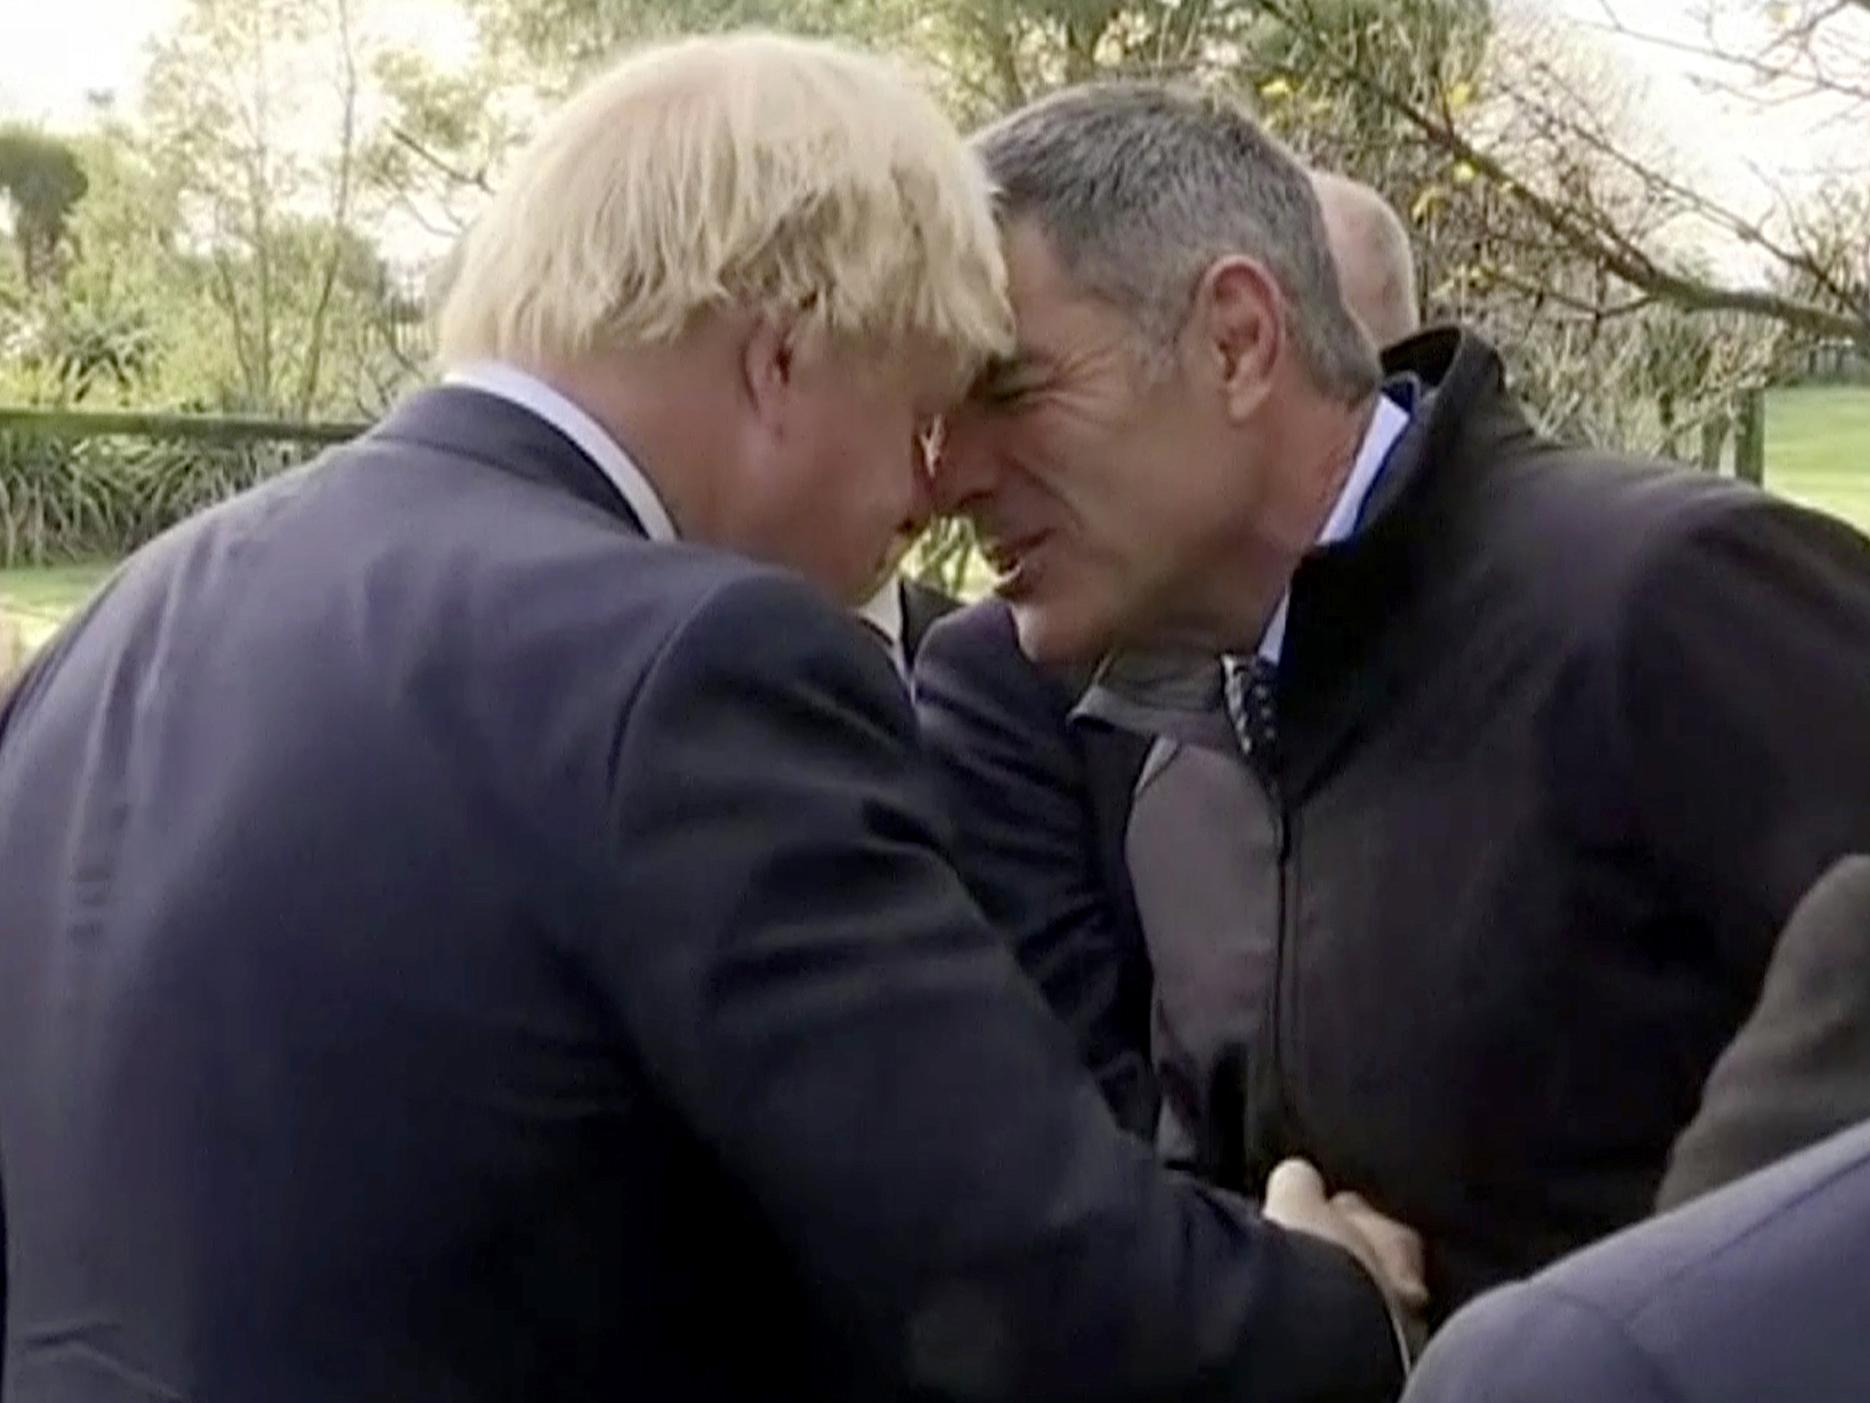 The Foreign Secretary performs a hongi with New Zealand industries minister Nathan Guy in Kaikoura on the South Island